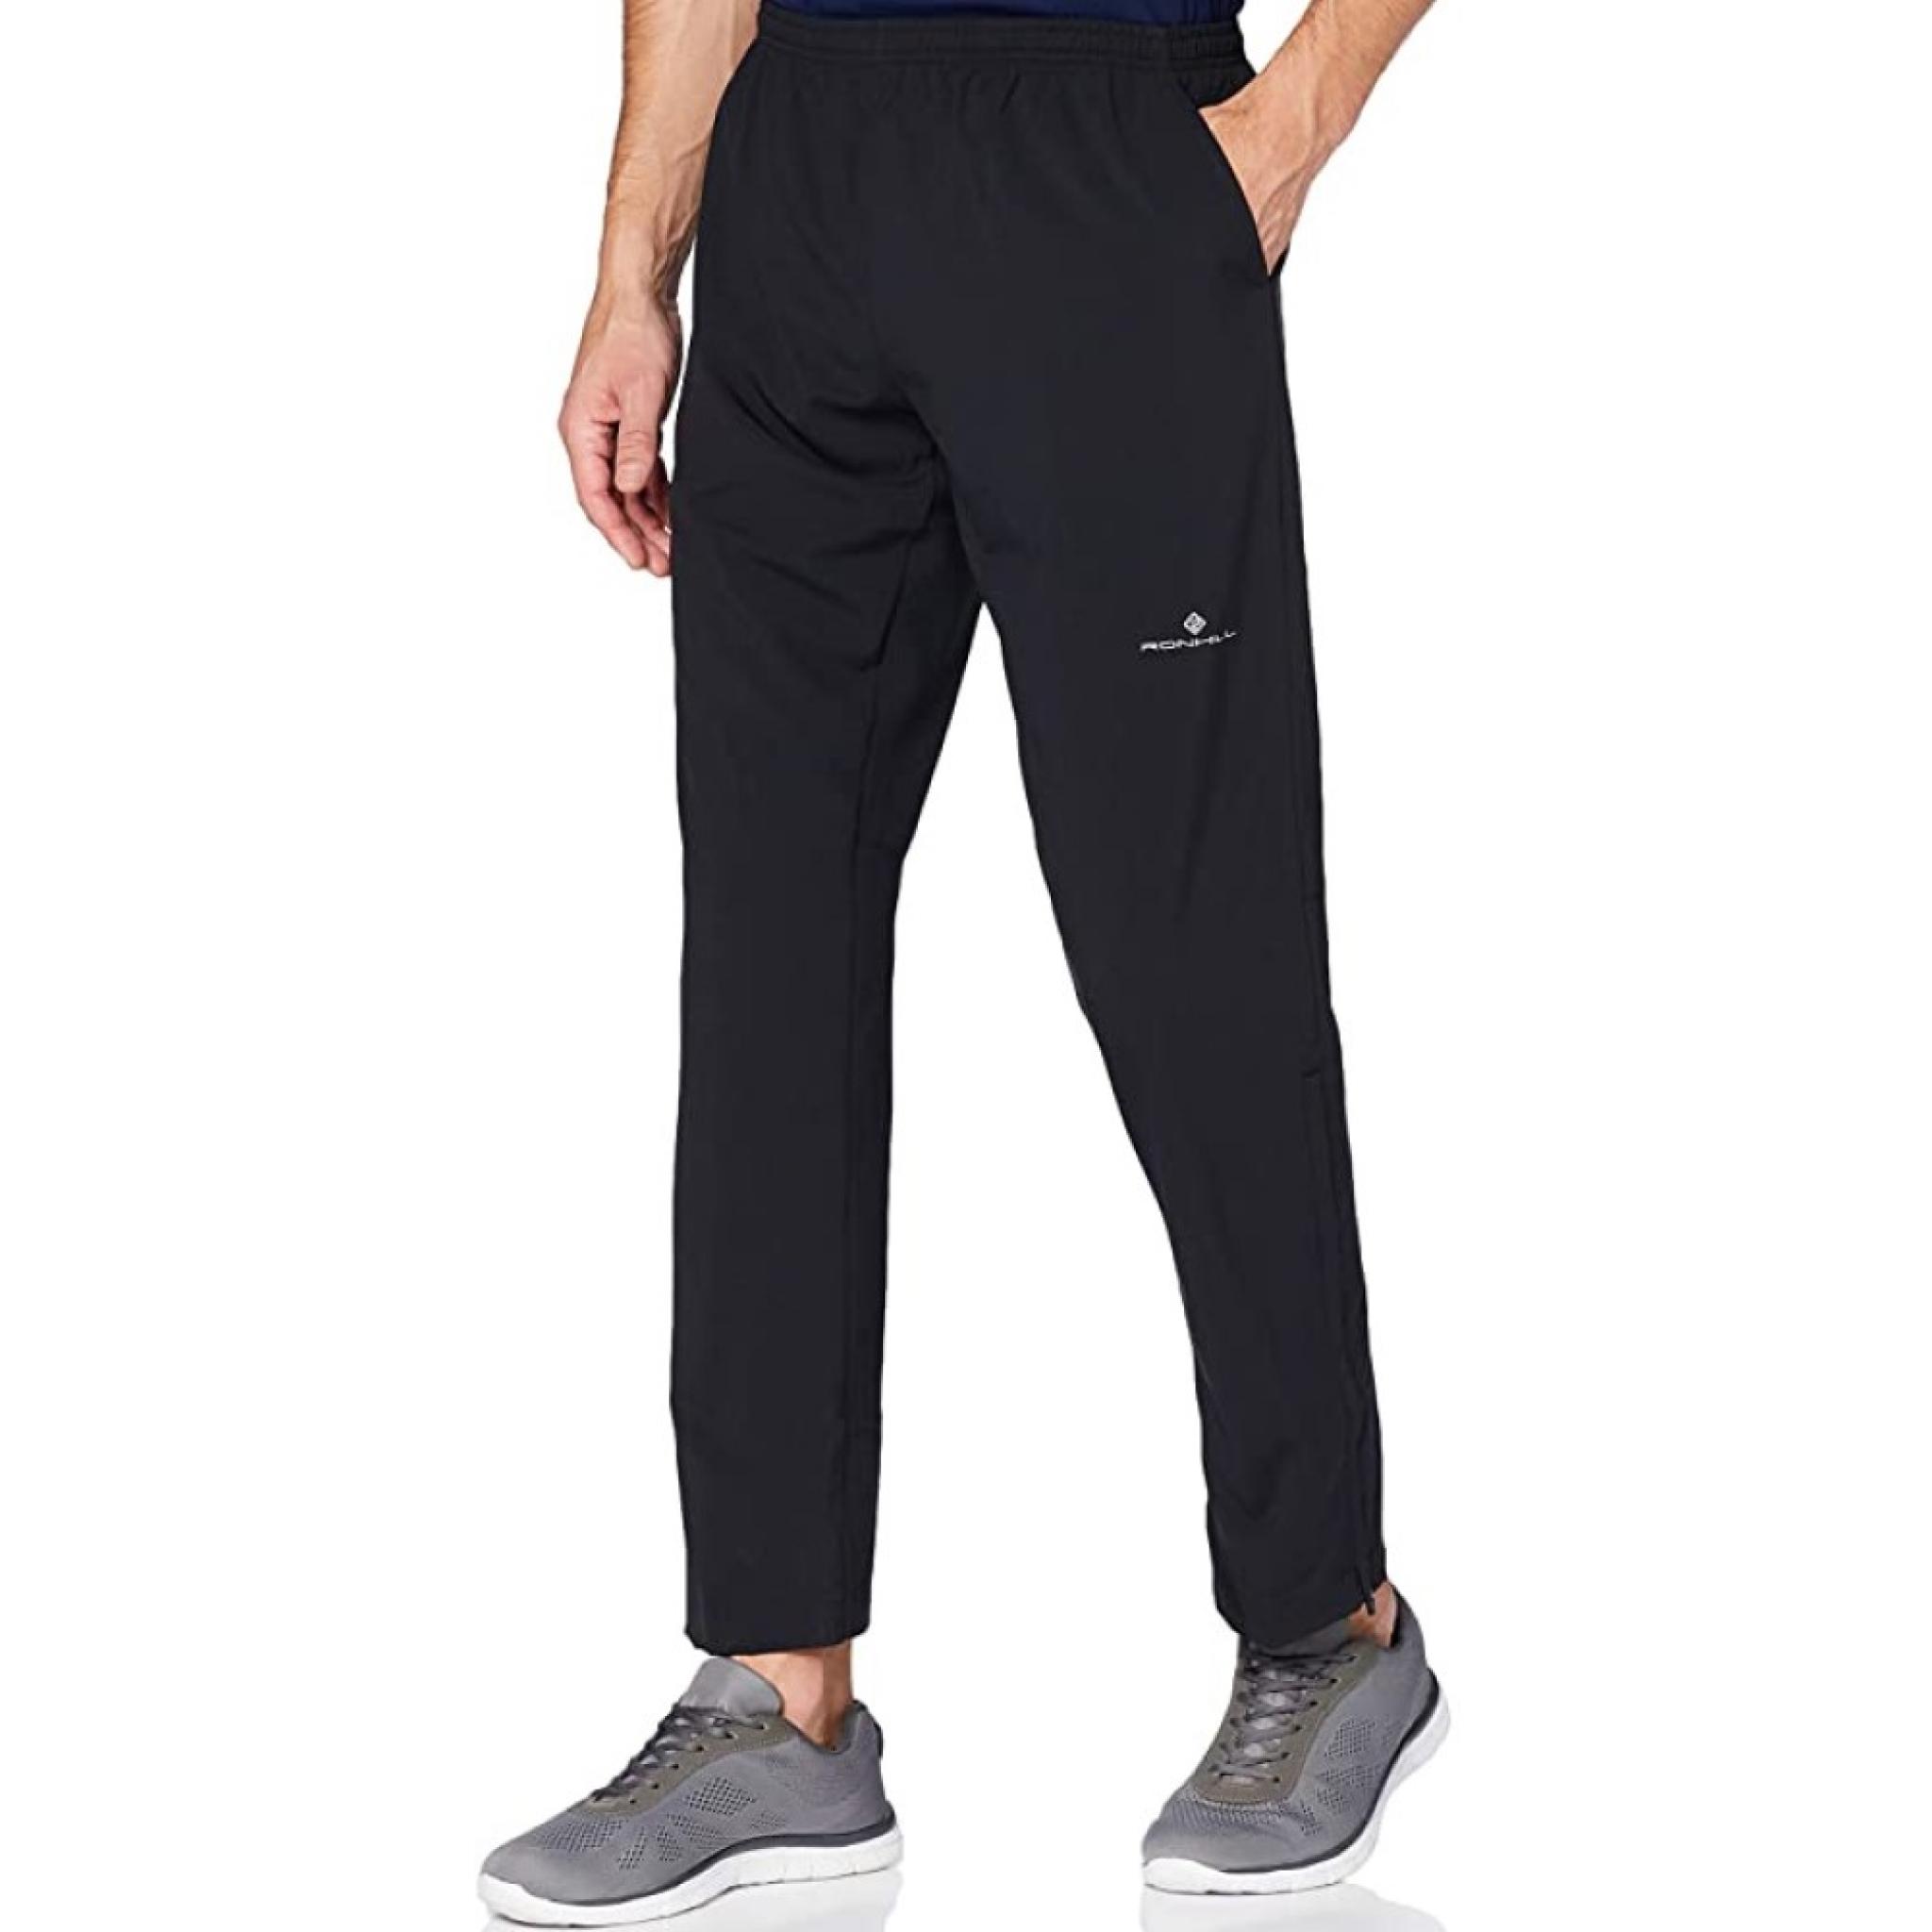 Ronhill Mens Core Sports Training Pant Running Trouser | Agoora Outdoor